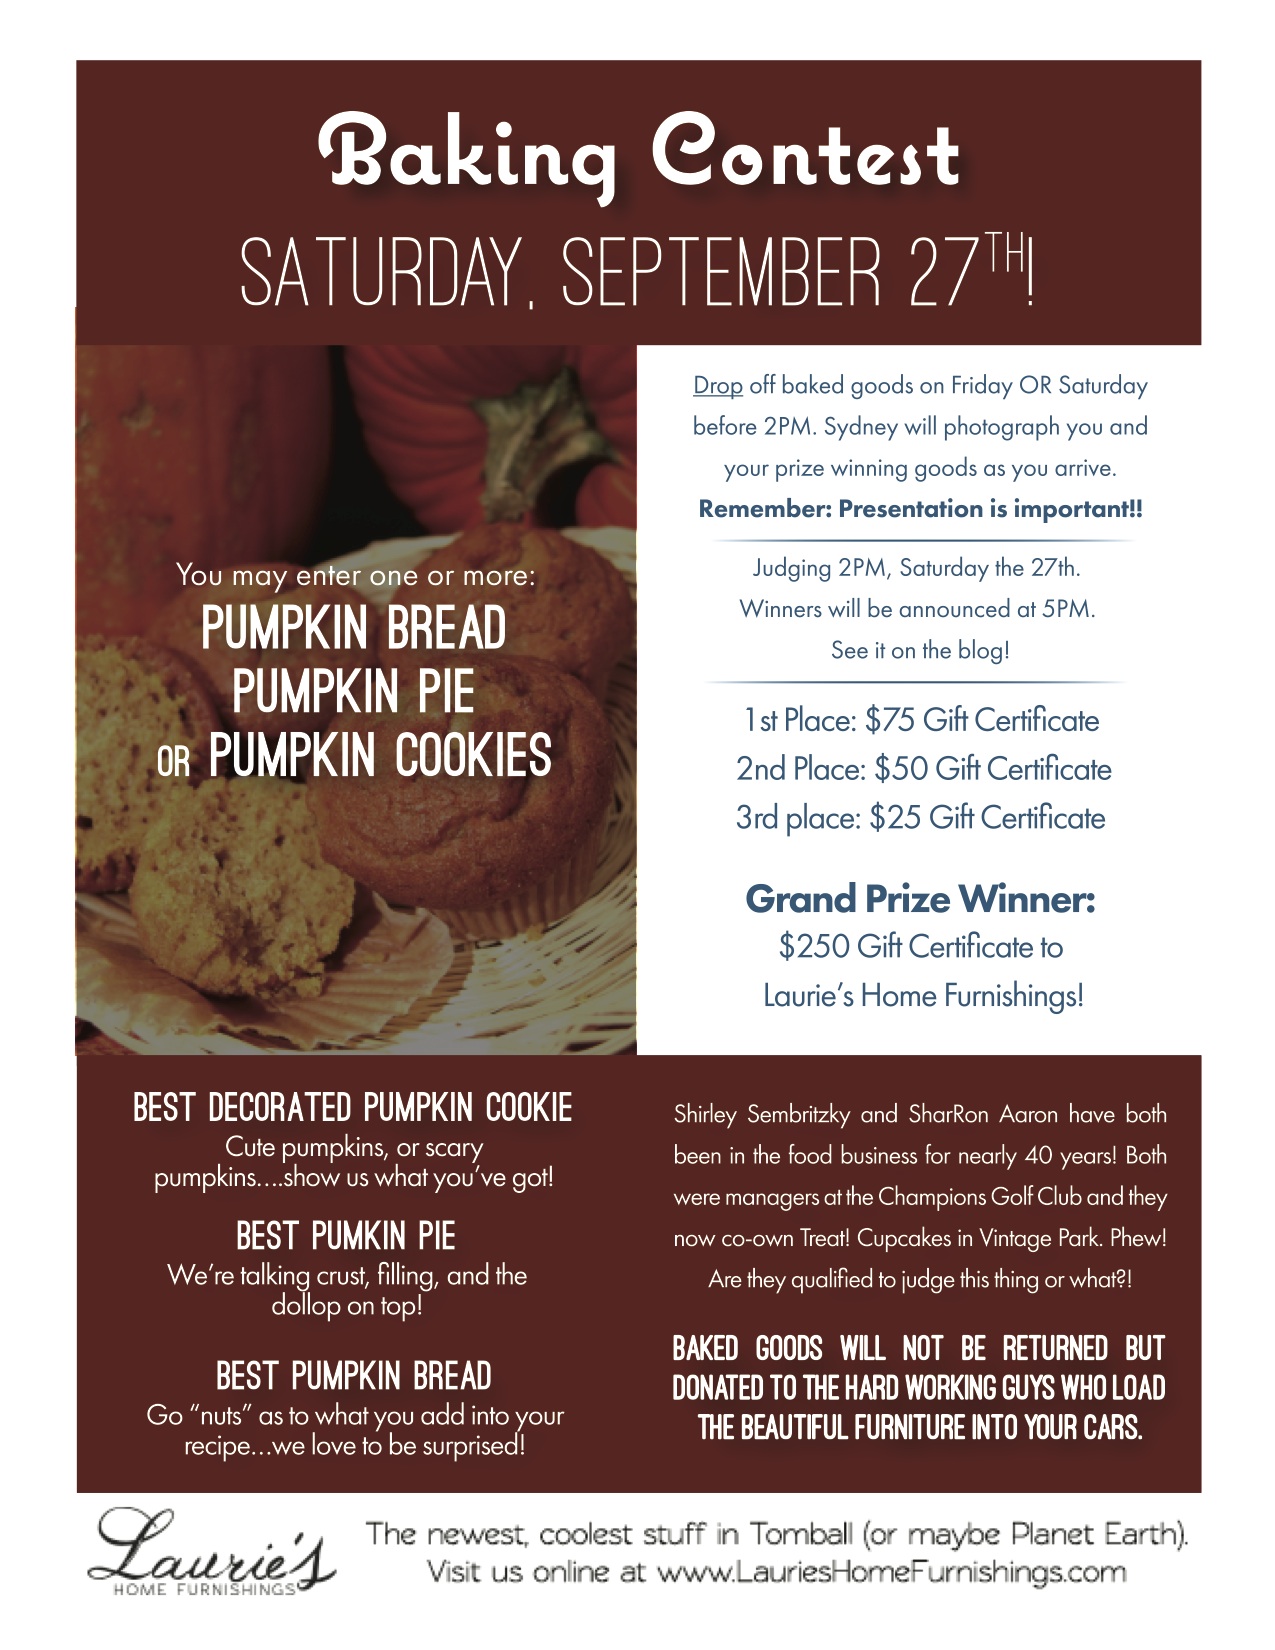 Lauries_Baking-Contest-Flyer_9-5-14_flatcolor (1)